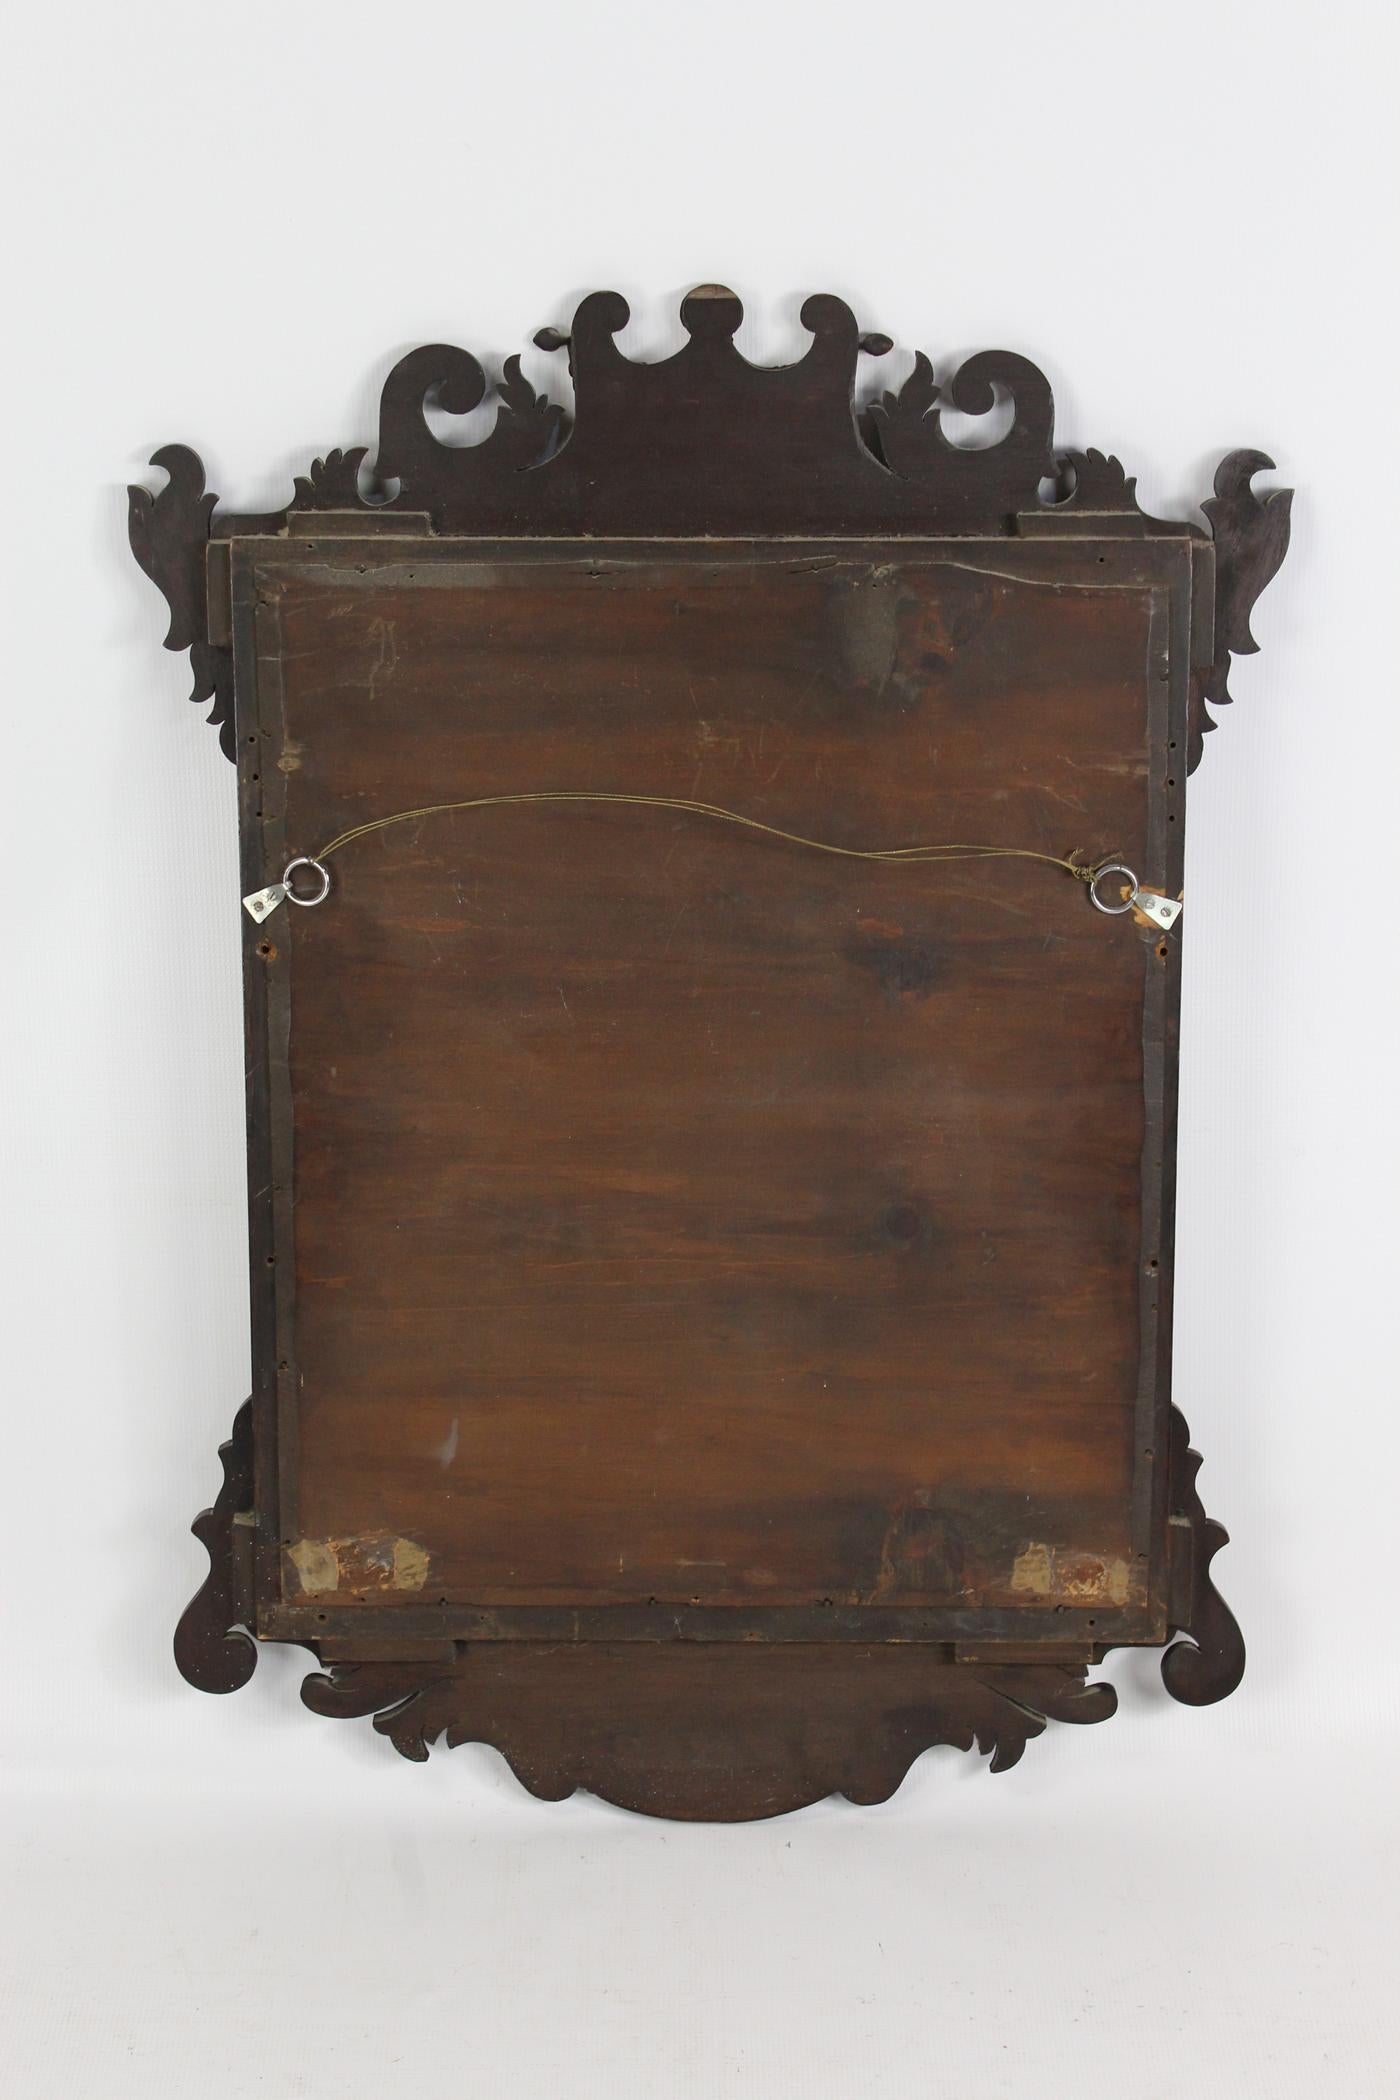 Antique Edwardian Chippendale Mahogany Fretwork Mirror Wall Bathroom Pier Glass For Sale 3